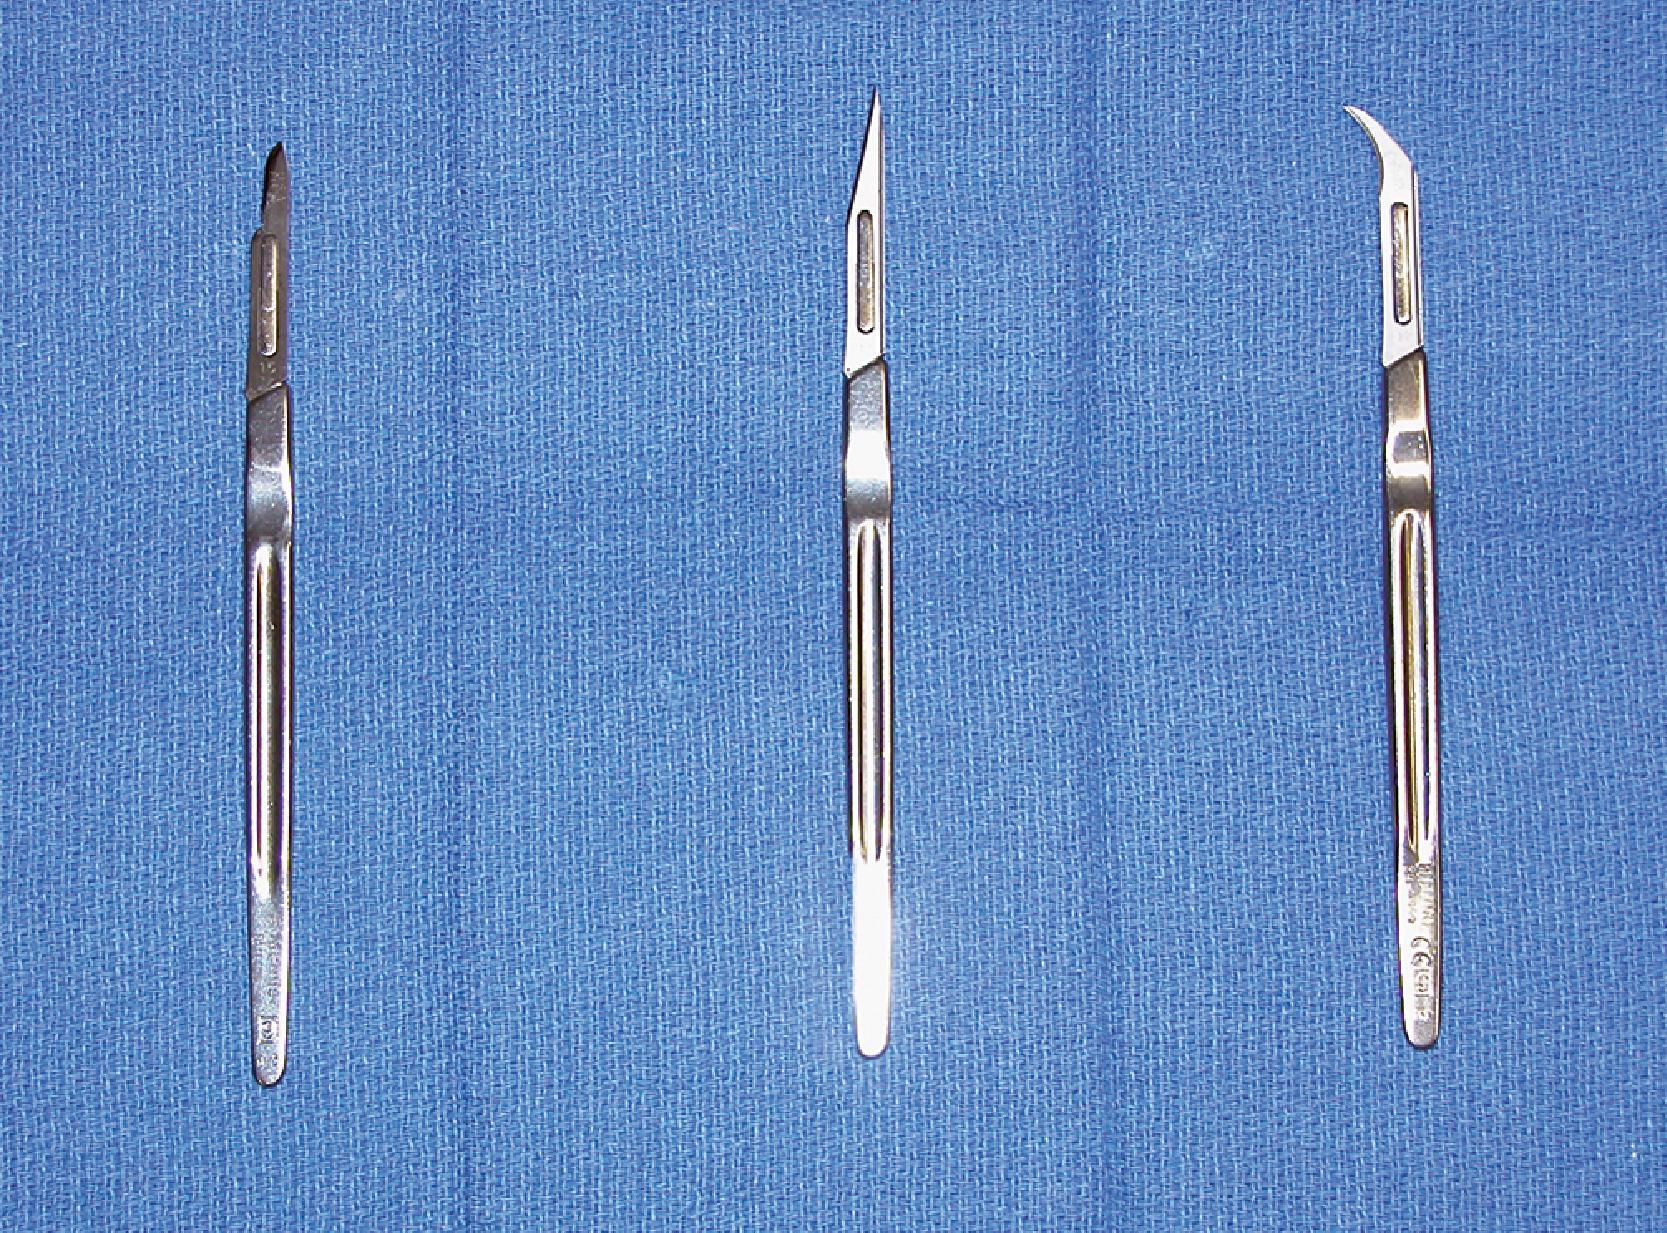 FIG. 4.1, The diversity of available surgical blades is demonstrated by the No. 15, No. 11, and No. 12 blades.